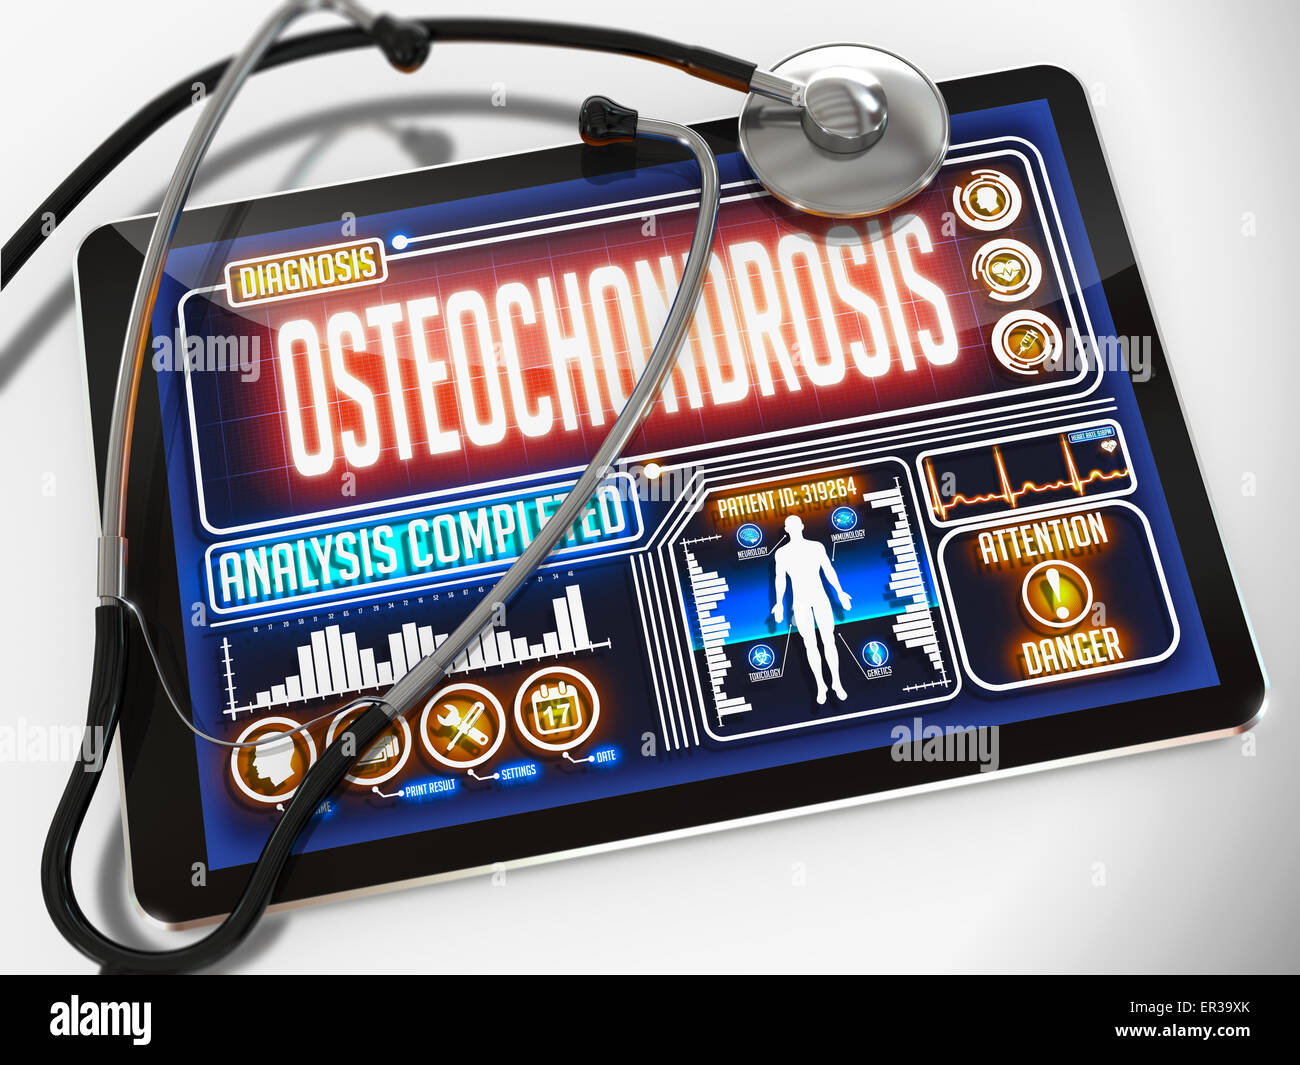 Osteochondrosis on the Display of Medical Tablet. Stock Photo